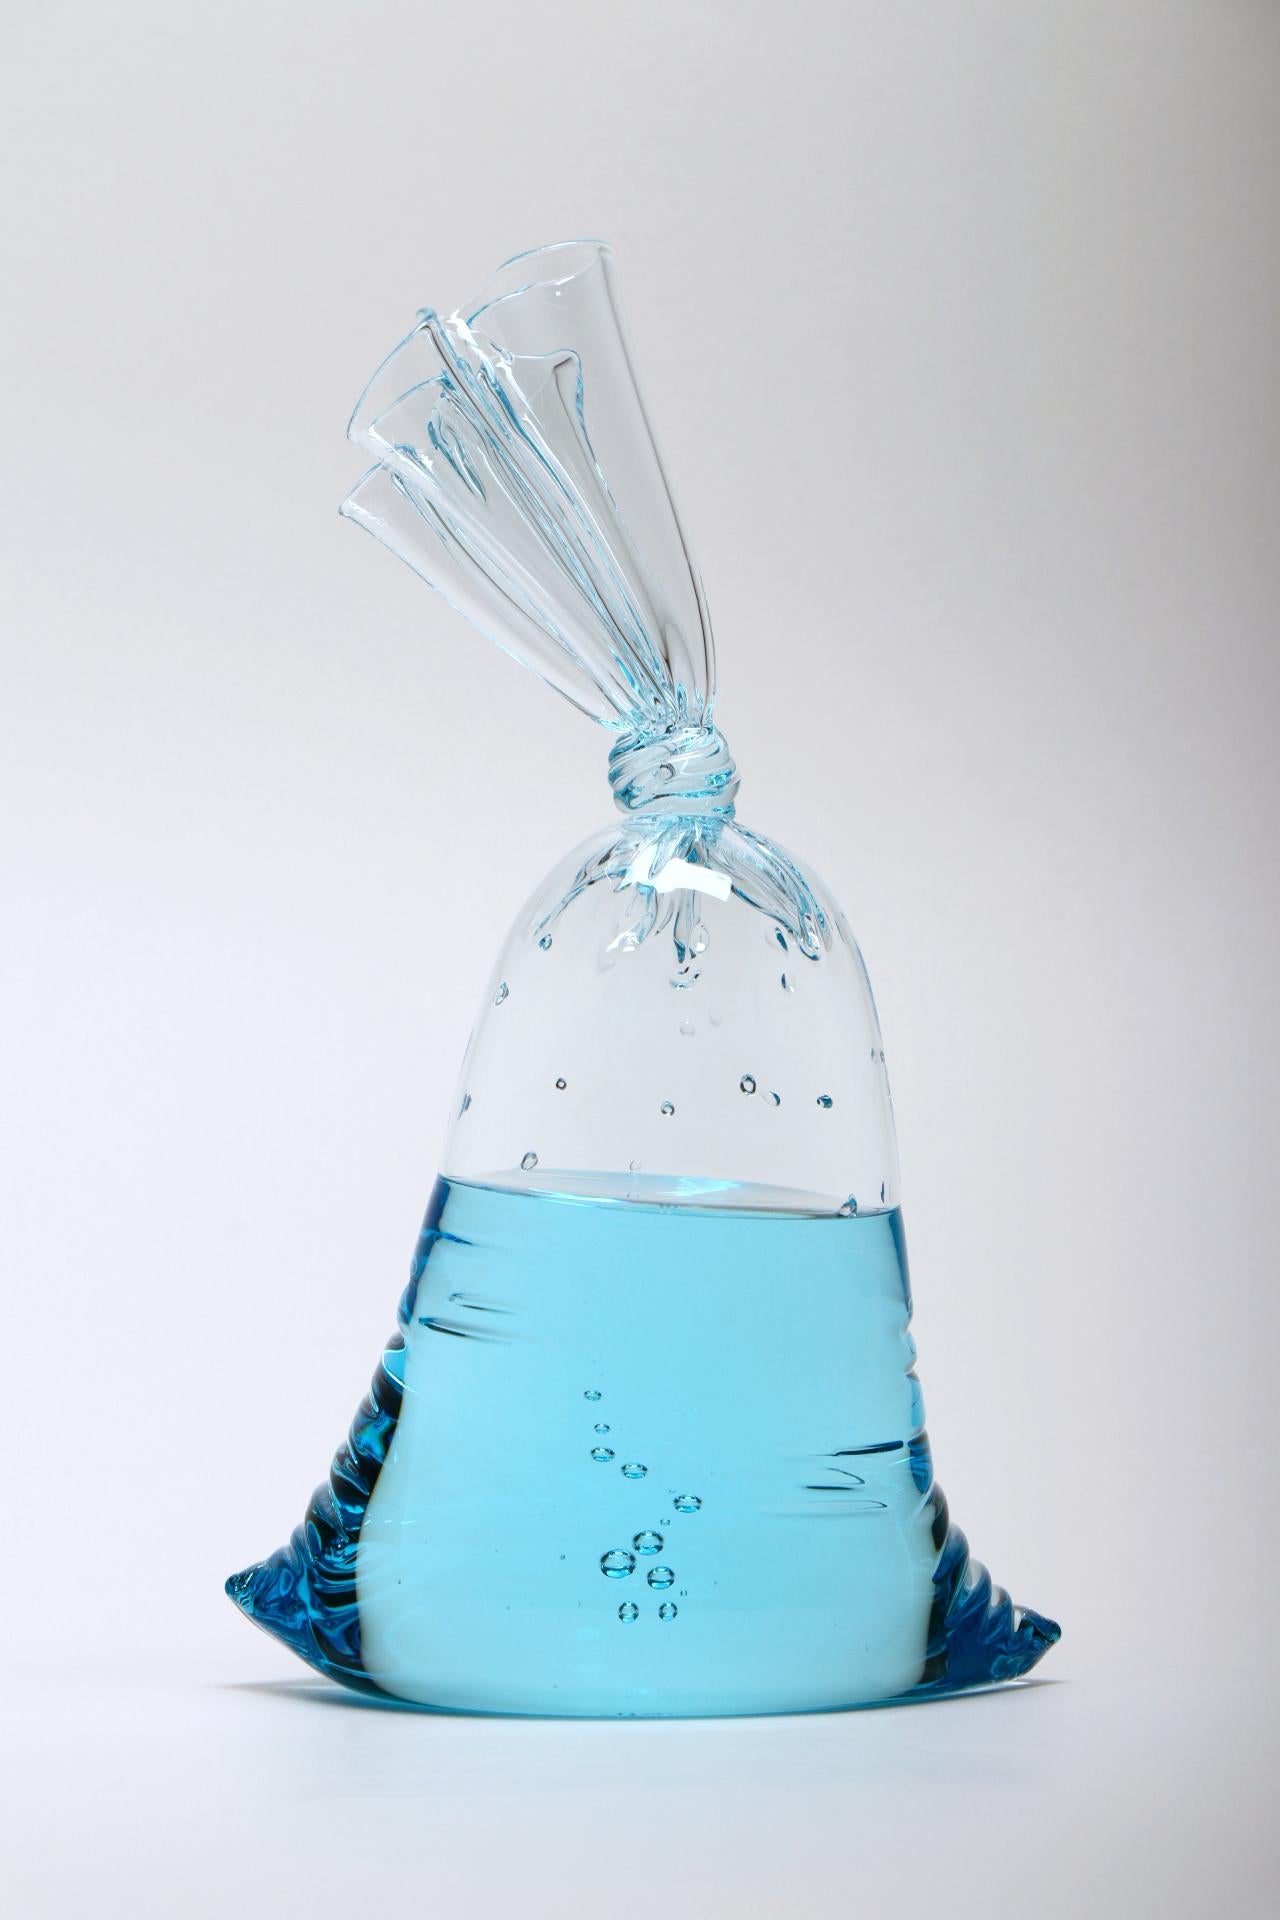 Blue Glass Water Bag Trio - Hyperreal glass sculpture installation - Contemporary Sculpture by Dylan Martinez